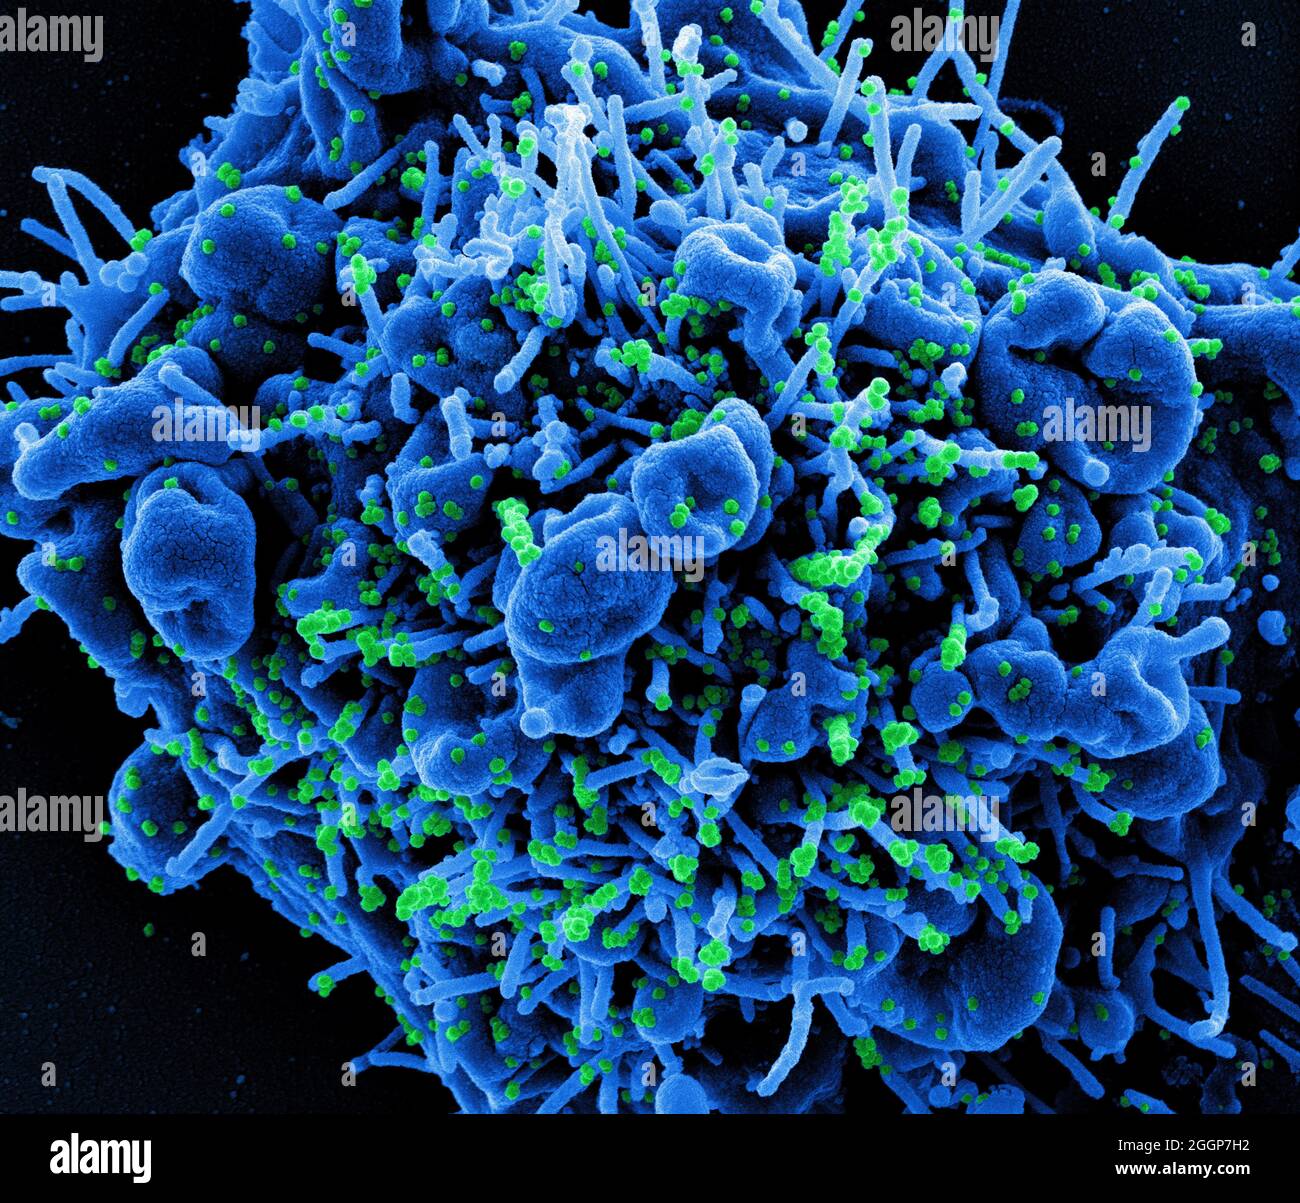 Colorized scanning electron micrograph of an apoptotic cell (blue) infected with SARS-COV-2 virus particles (green), isolated from a patient sample. Stock Photo